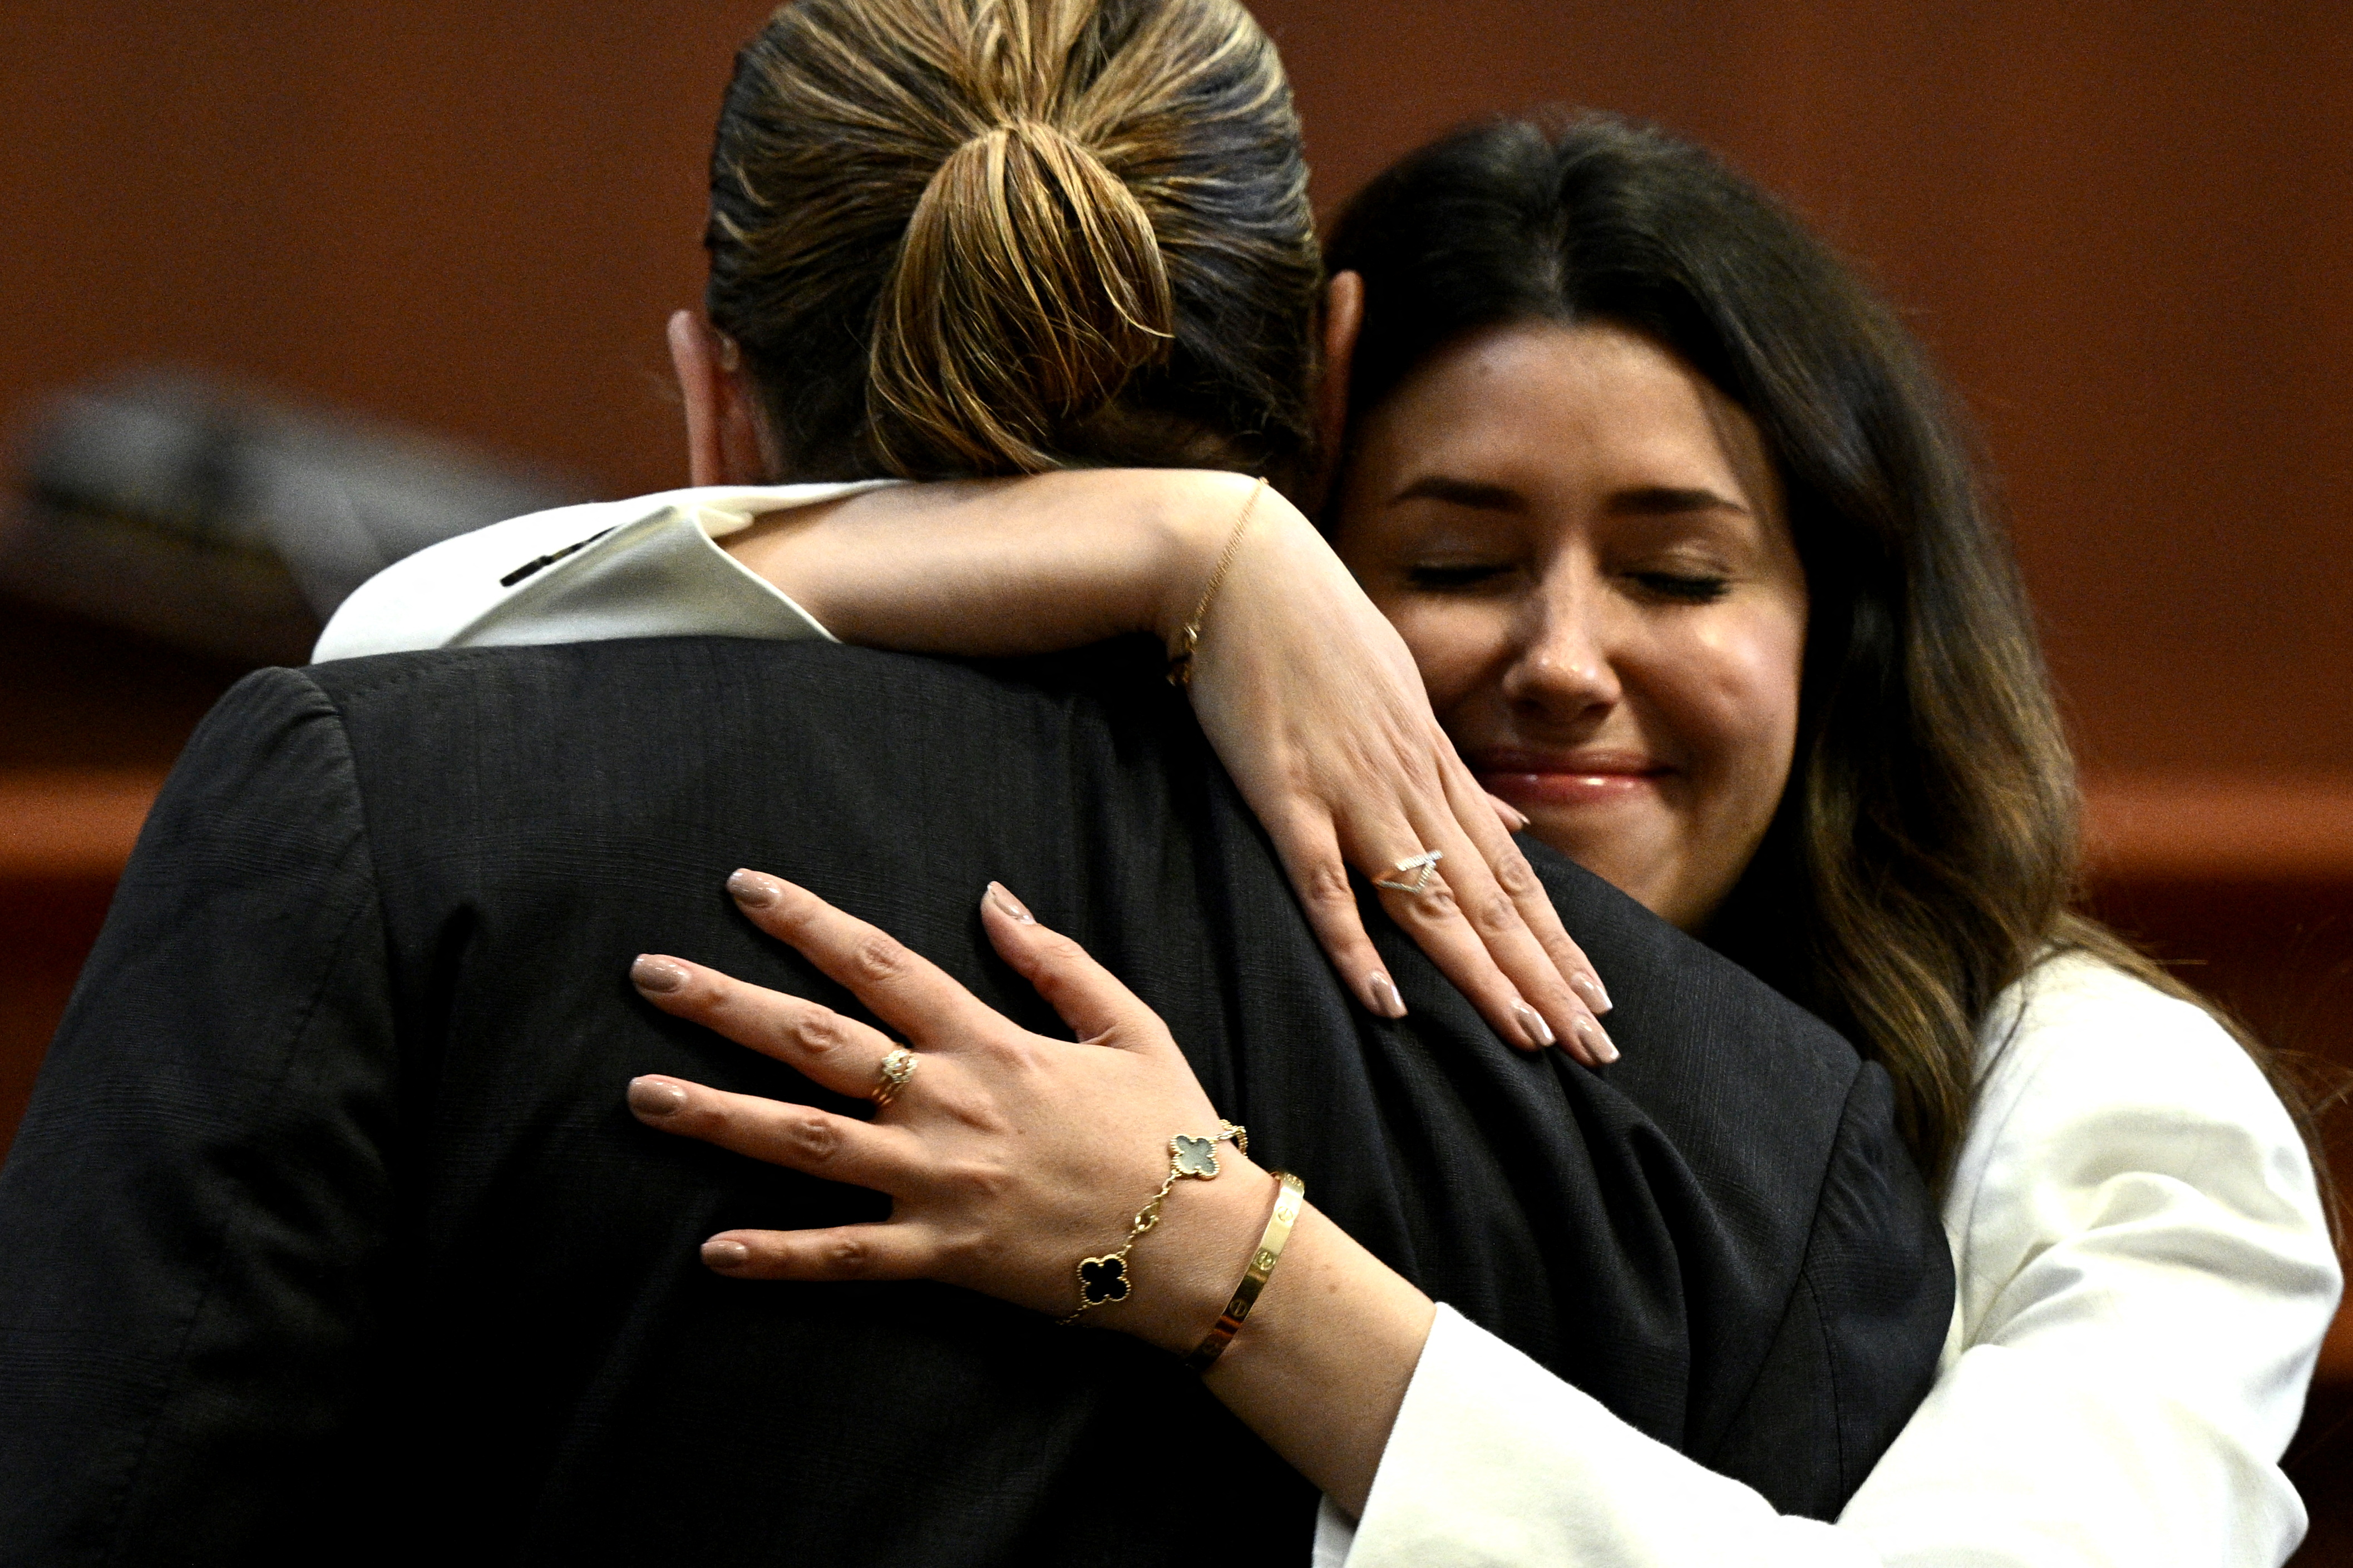 Camille Vasquez managed to shine for her participation in court (Photo: Reuters)